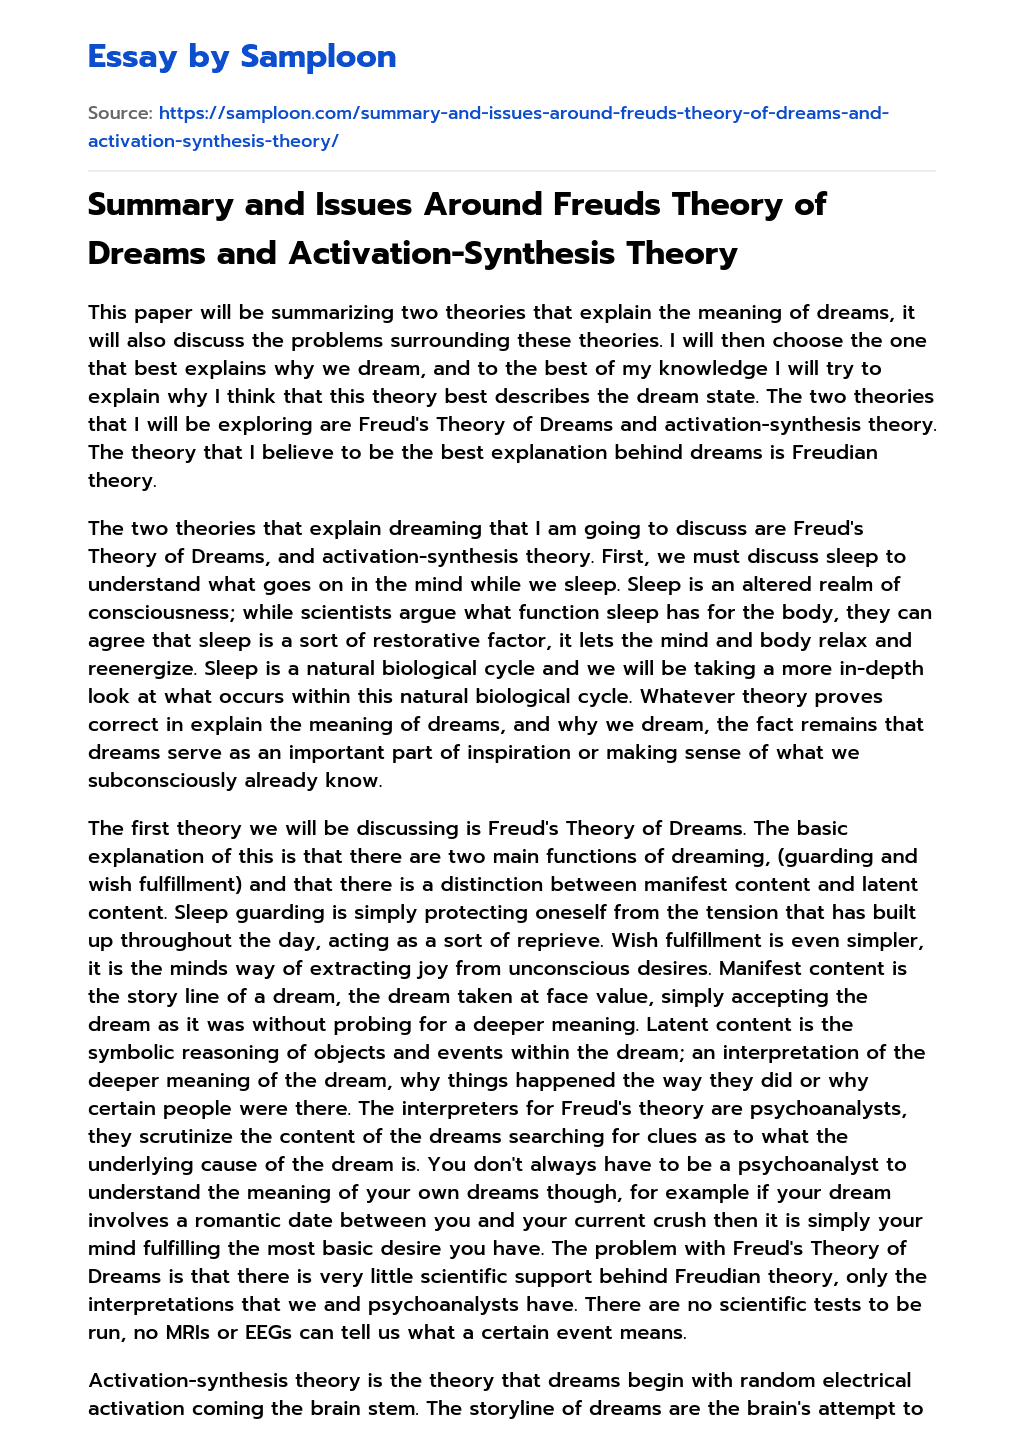 Summary and Issues Around Freuds Theory of Dreams and Activation-Synthesis Theory essay